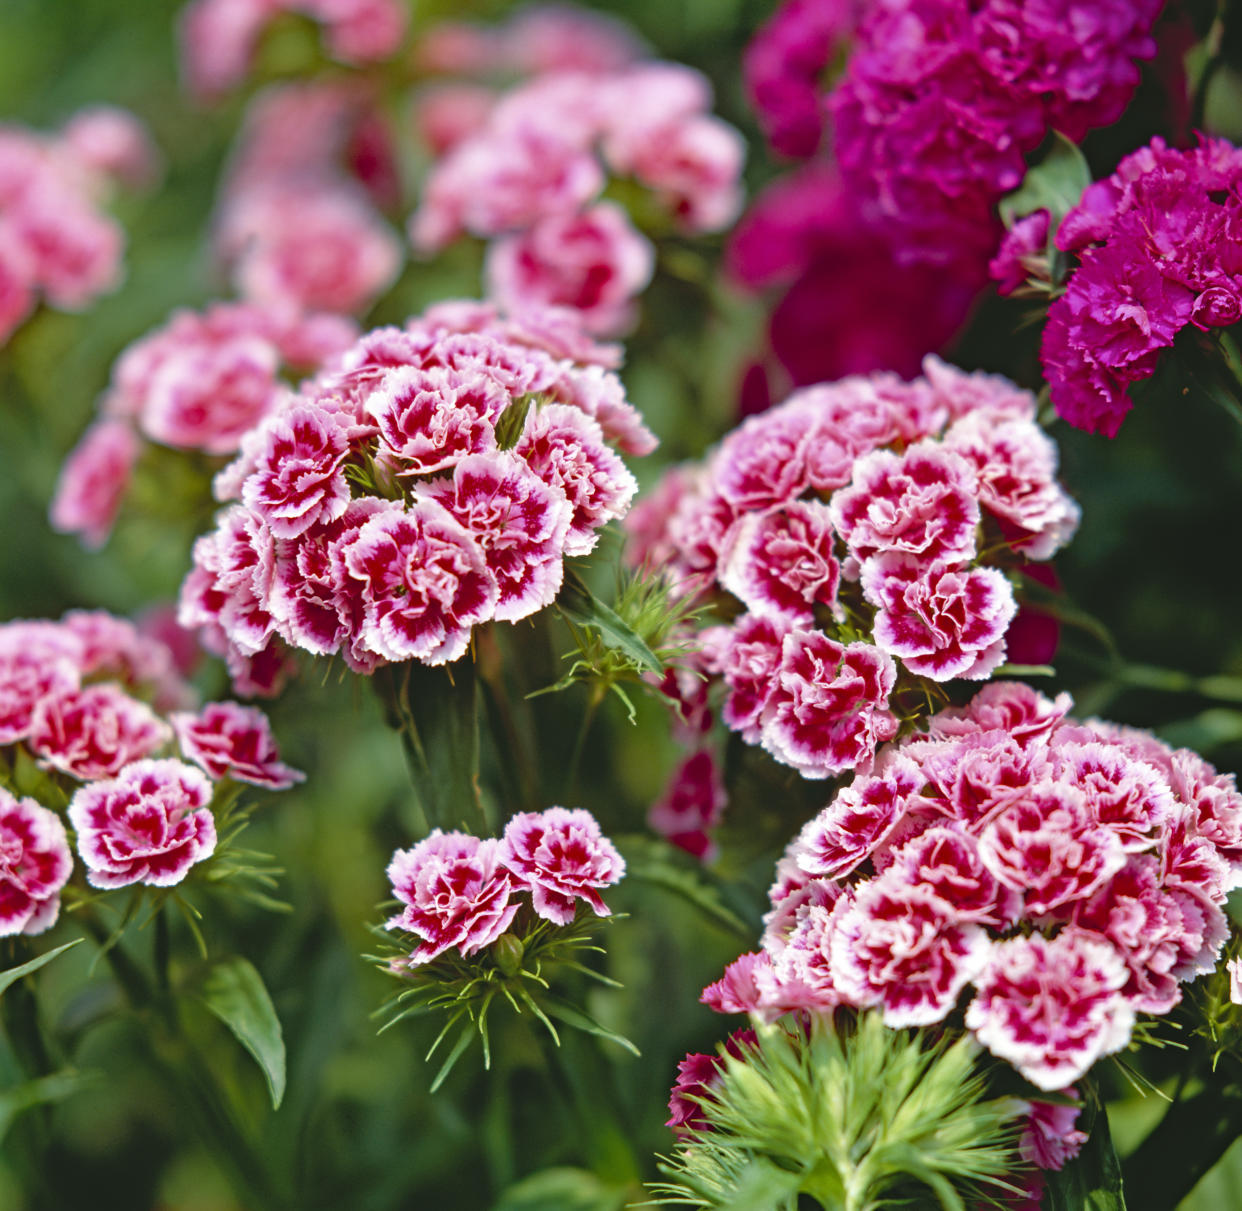 Three middle school boys handed out pink carnations to female students. (Photo: Stanzel/Ullstein Bild via Getty Images)